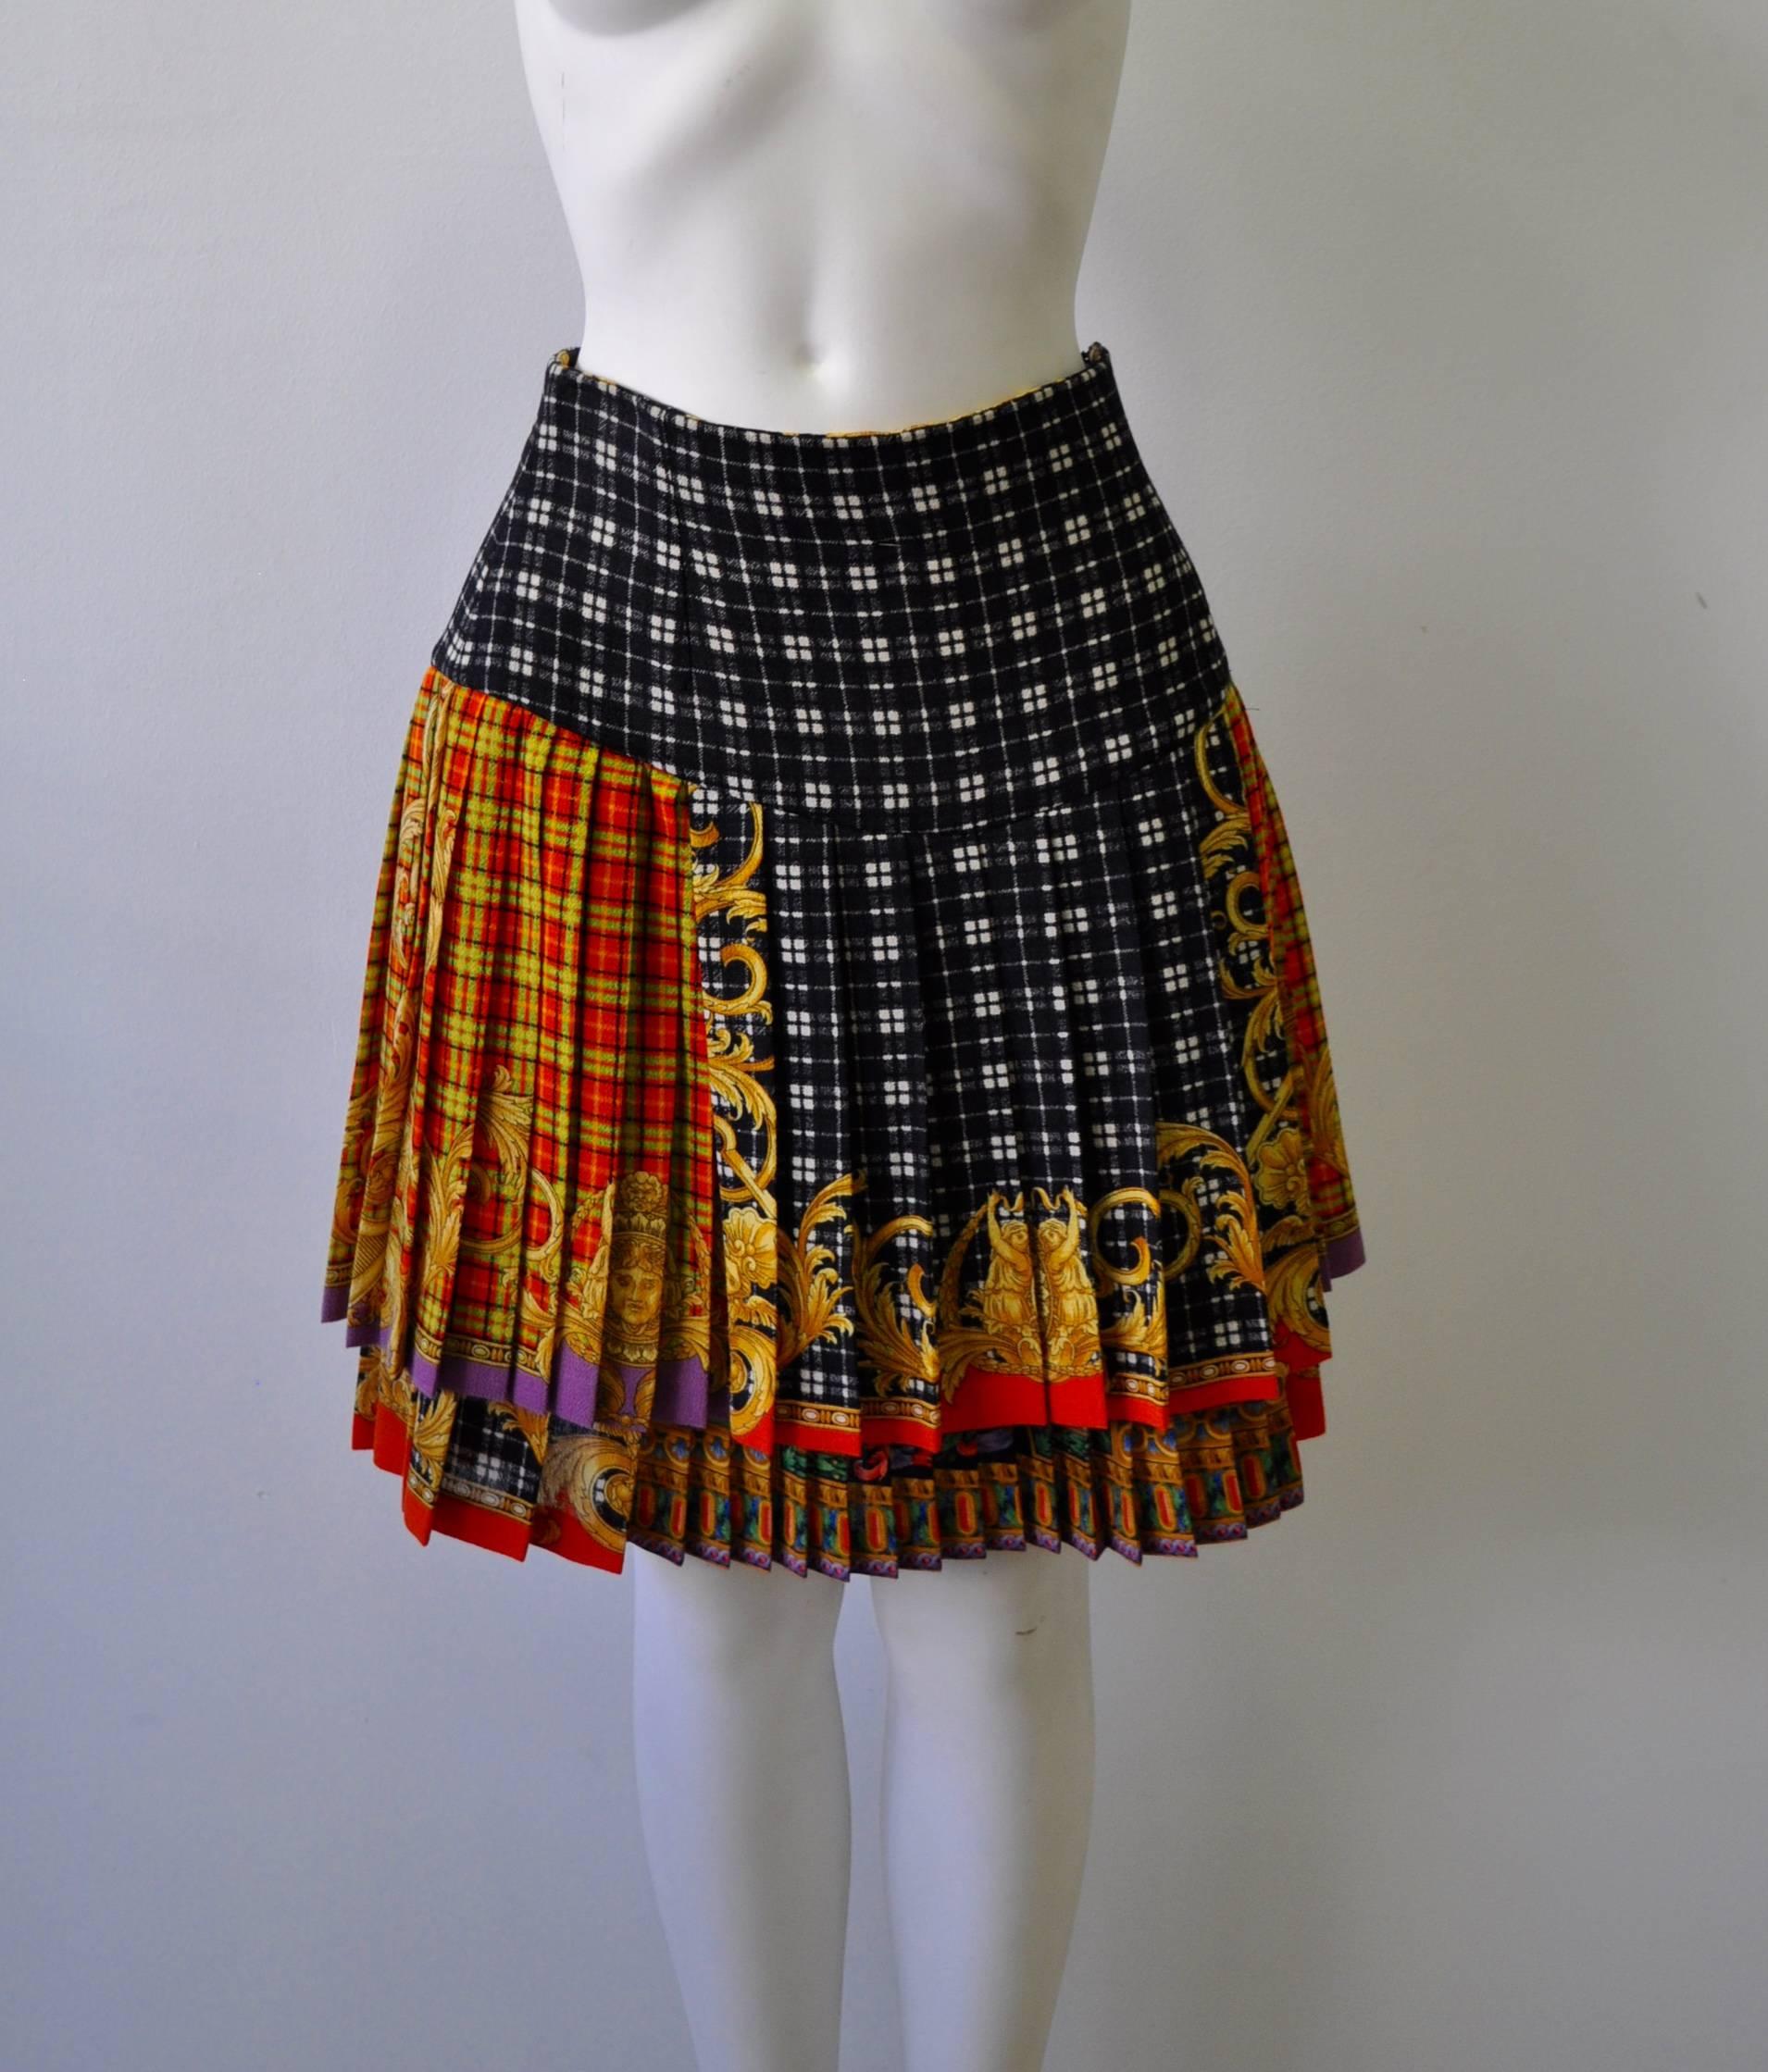 Gianni Versace Couture Tartan Pleated Wool Blend Skirt interspersed with the Iconic Medusa image and layered baroque print from the notorious Bondage Collection Fall 1992